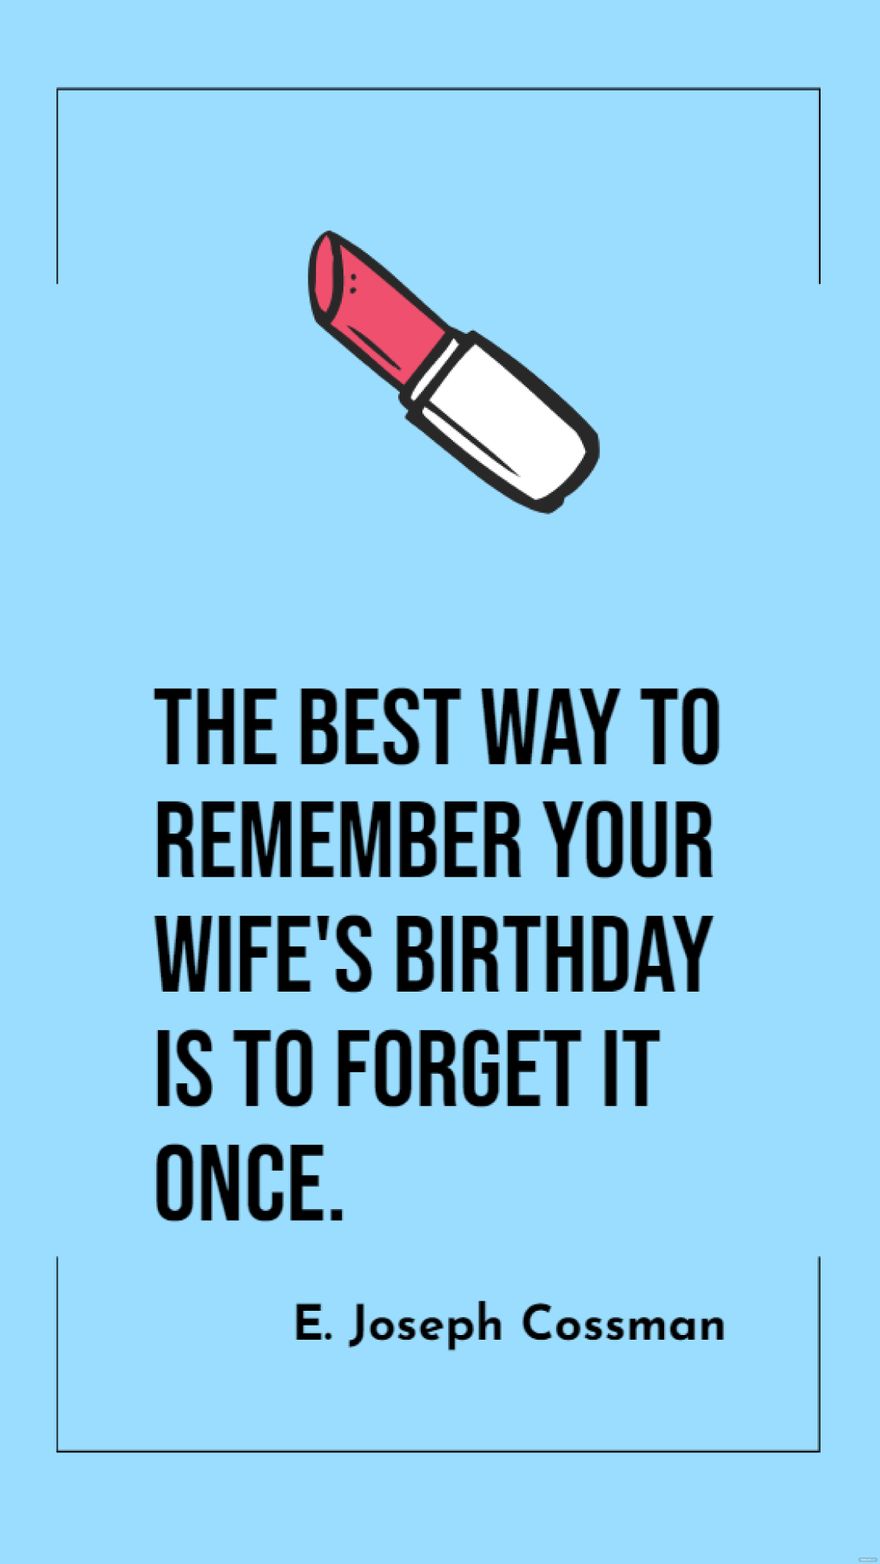 E. Joseph Cossman - The best way to remember your wife's birthday is to forget it once. in JPG